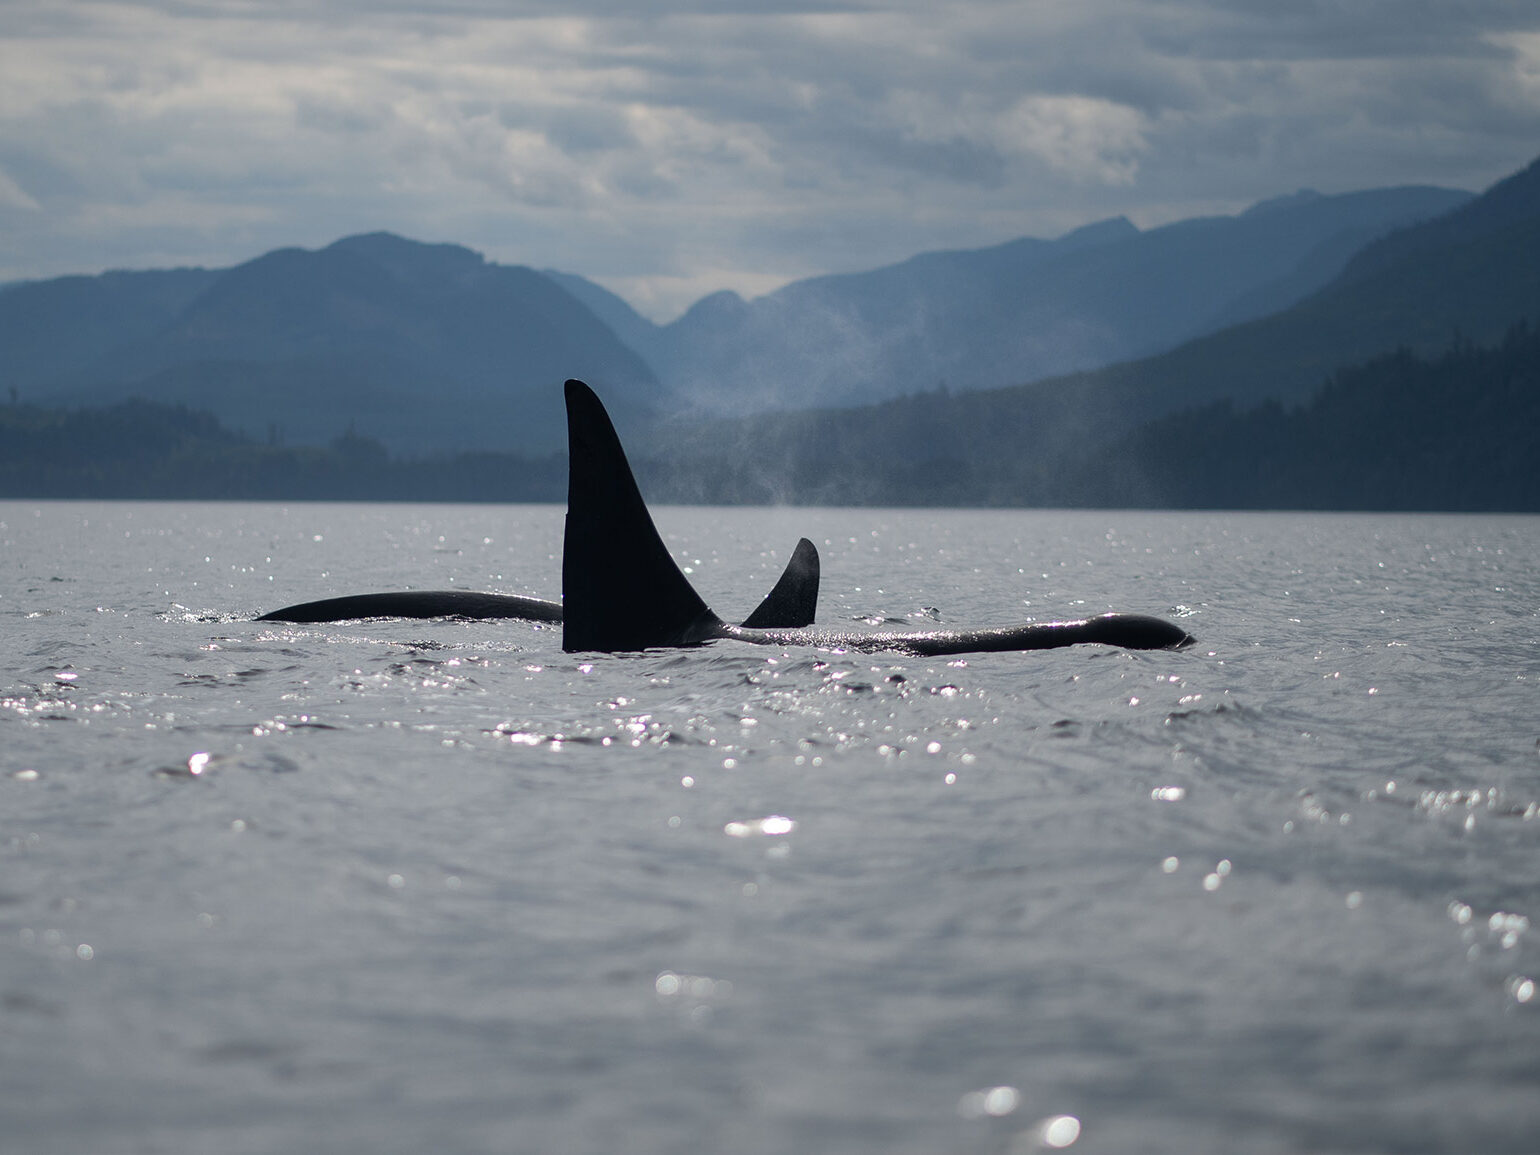 Two killer whales surfacing on the ocean.